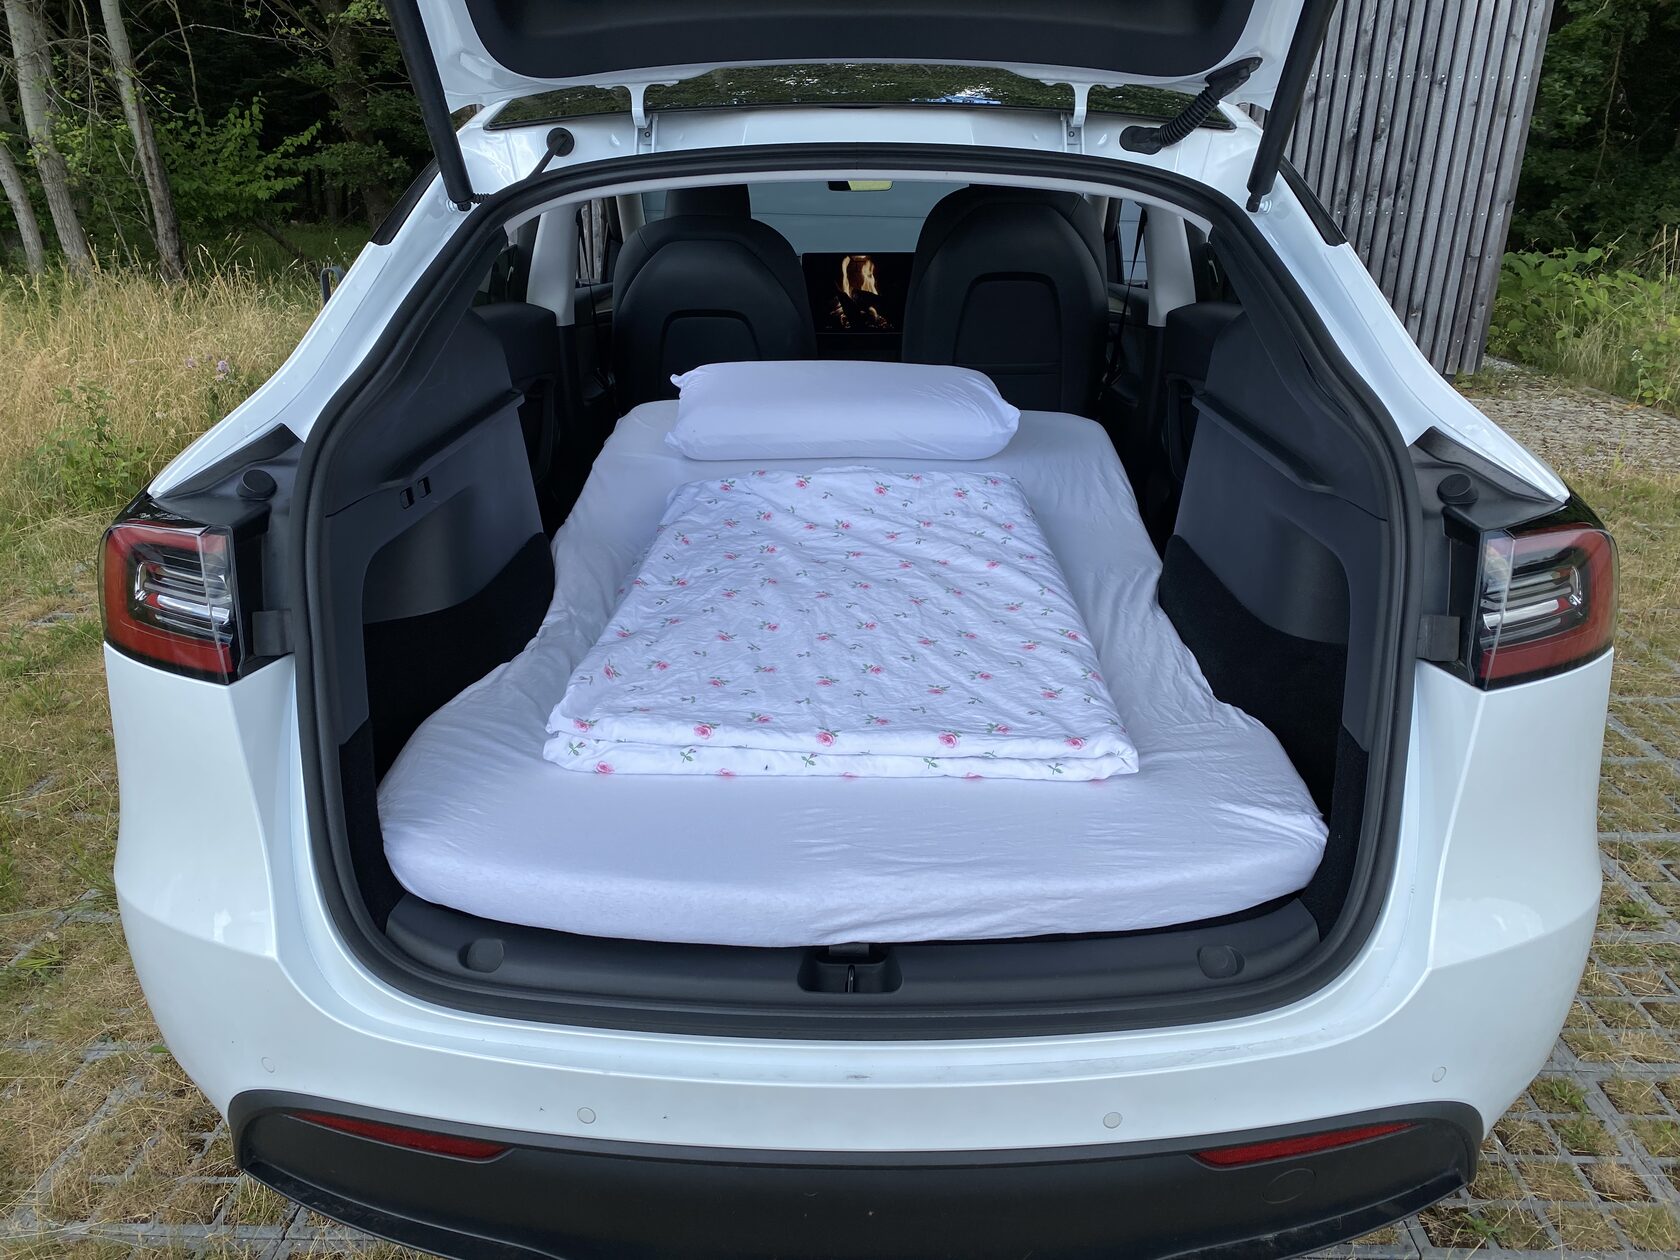 Tesla camping rental - camping equipment for your next adventure